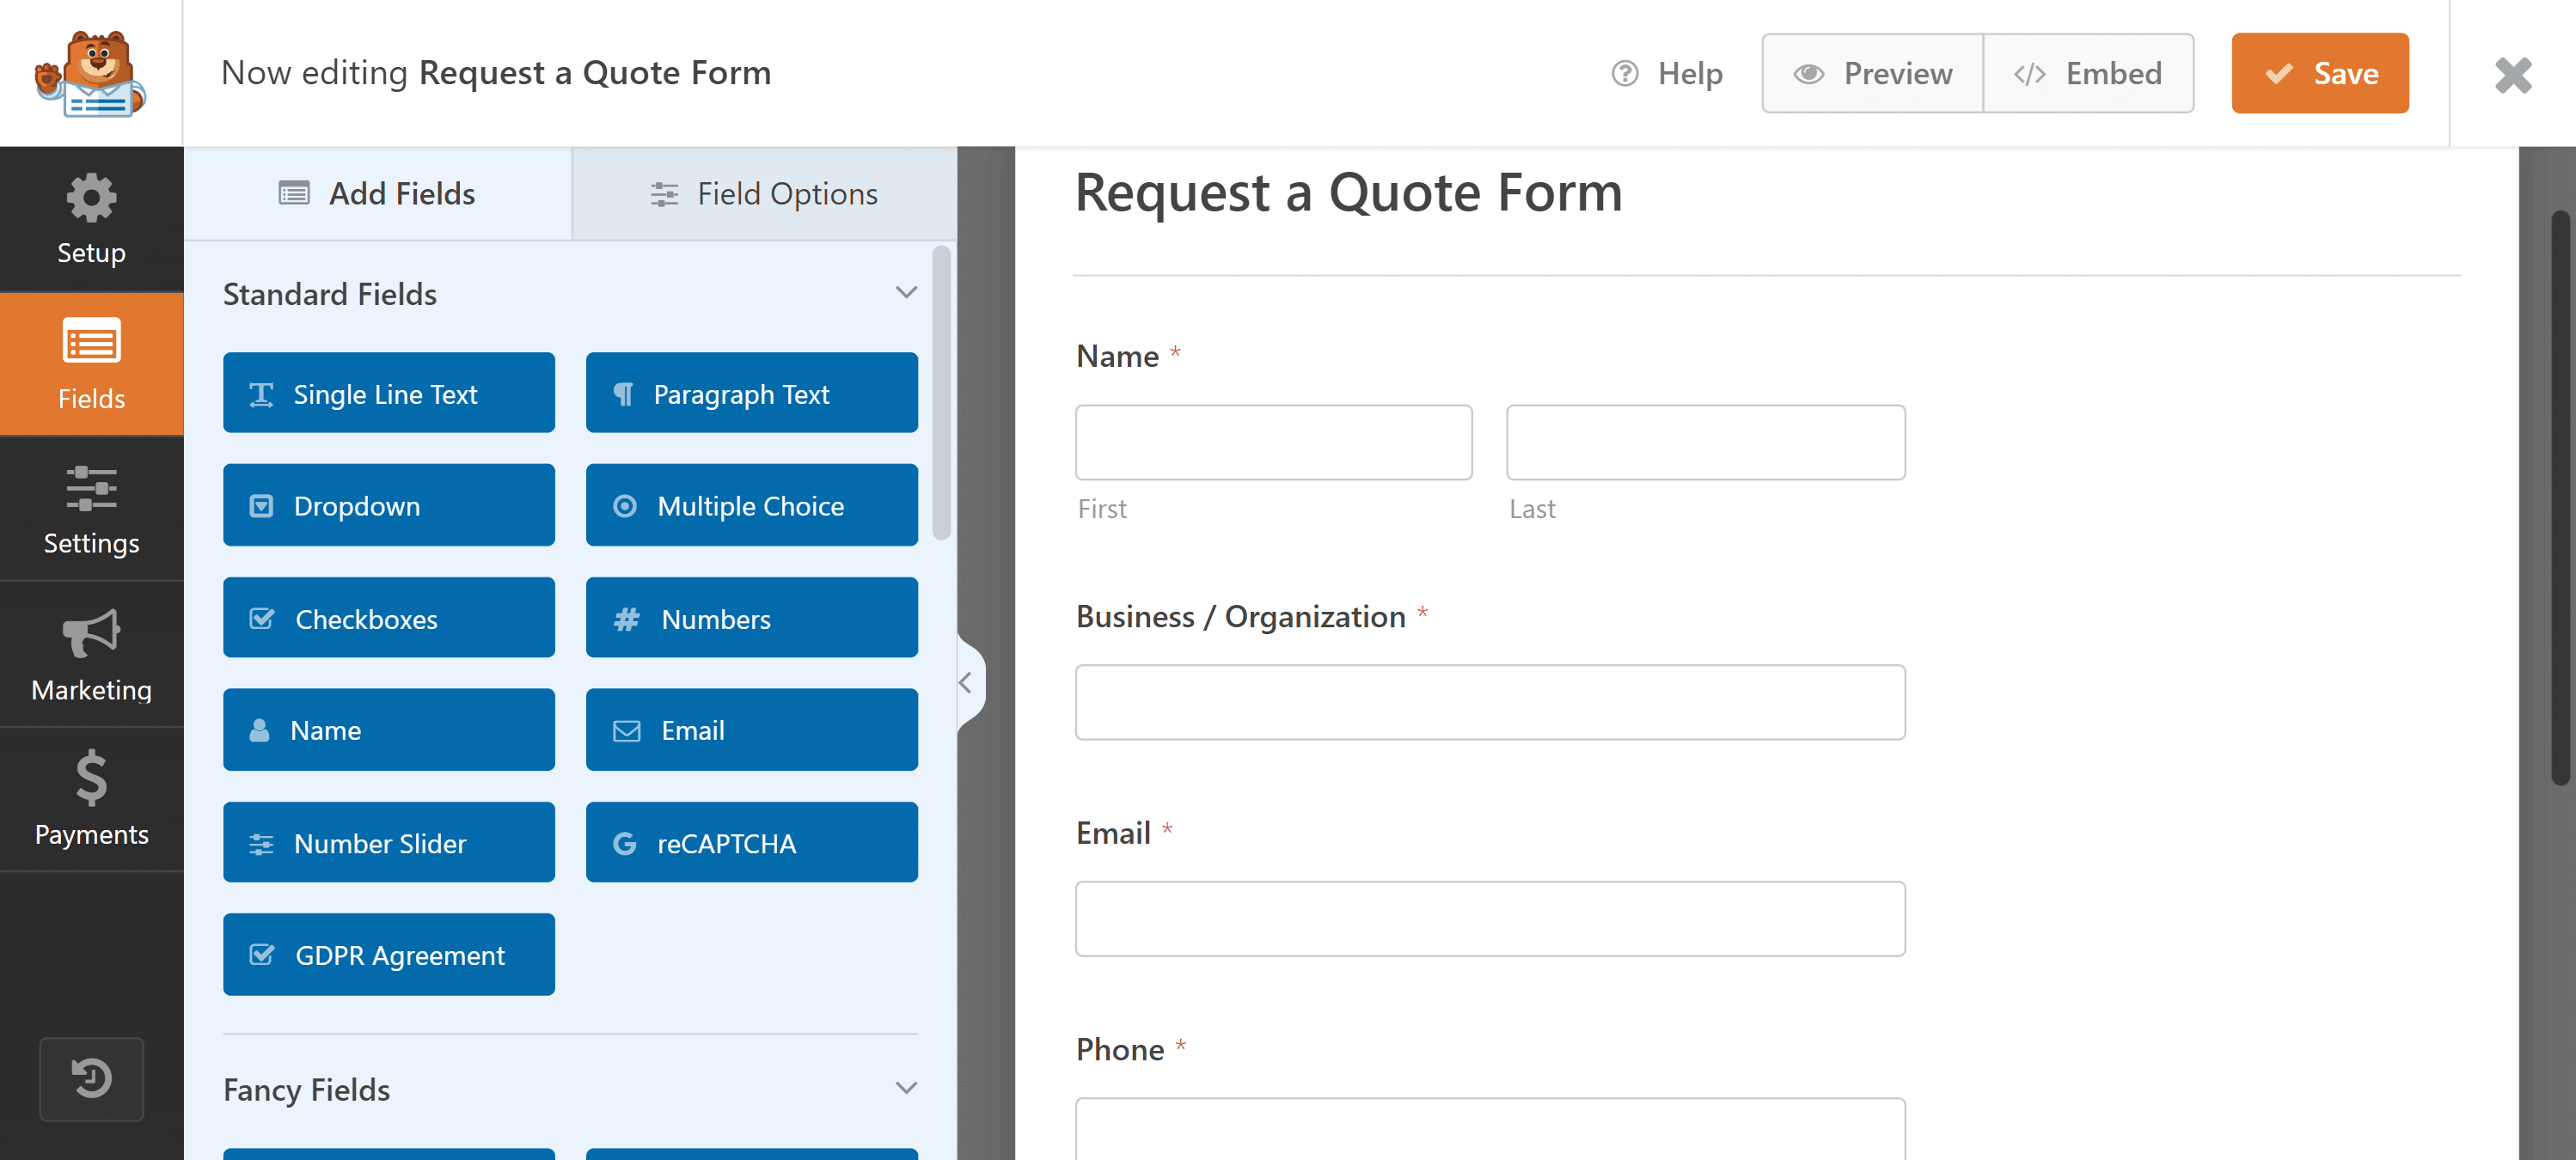 Request a quote form template loaded